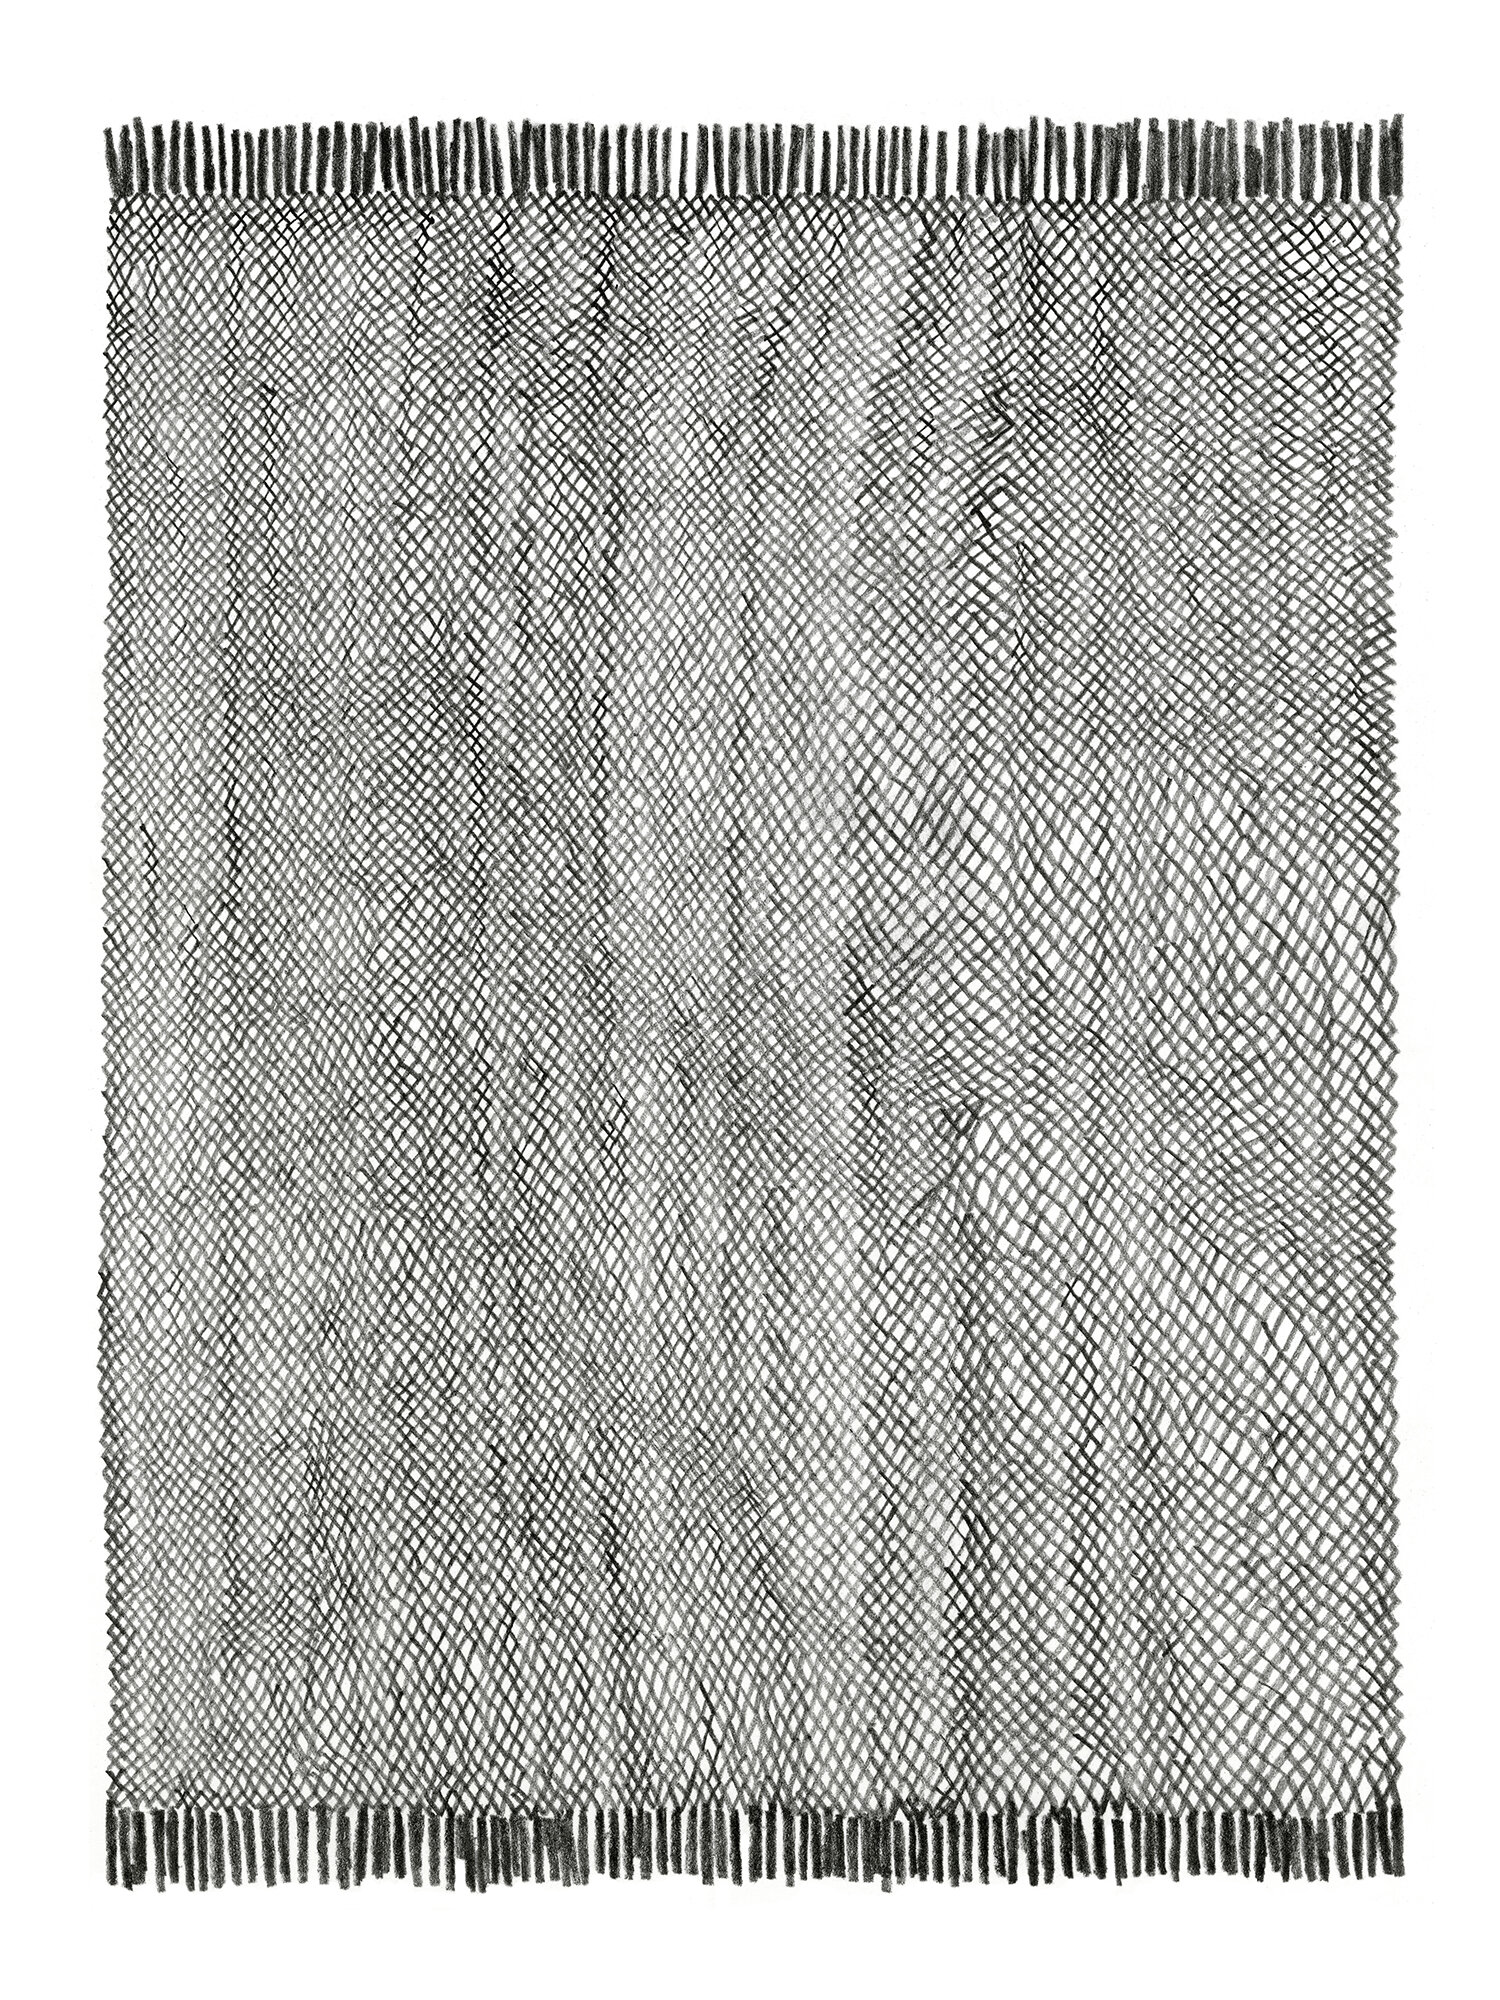   Small Weave Rug  Pencil on paper 12 x 9 inches   